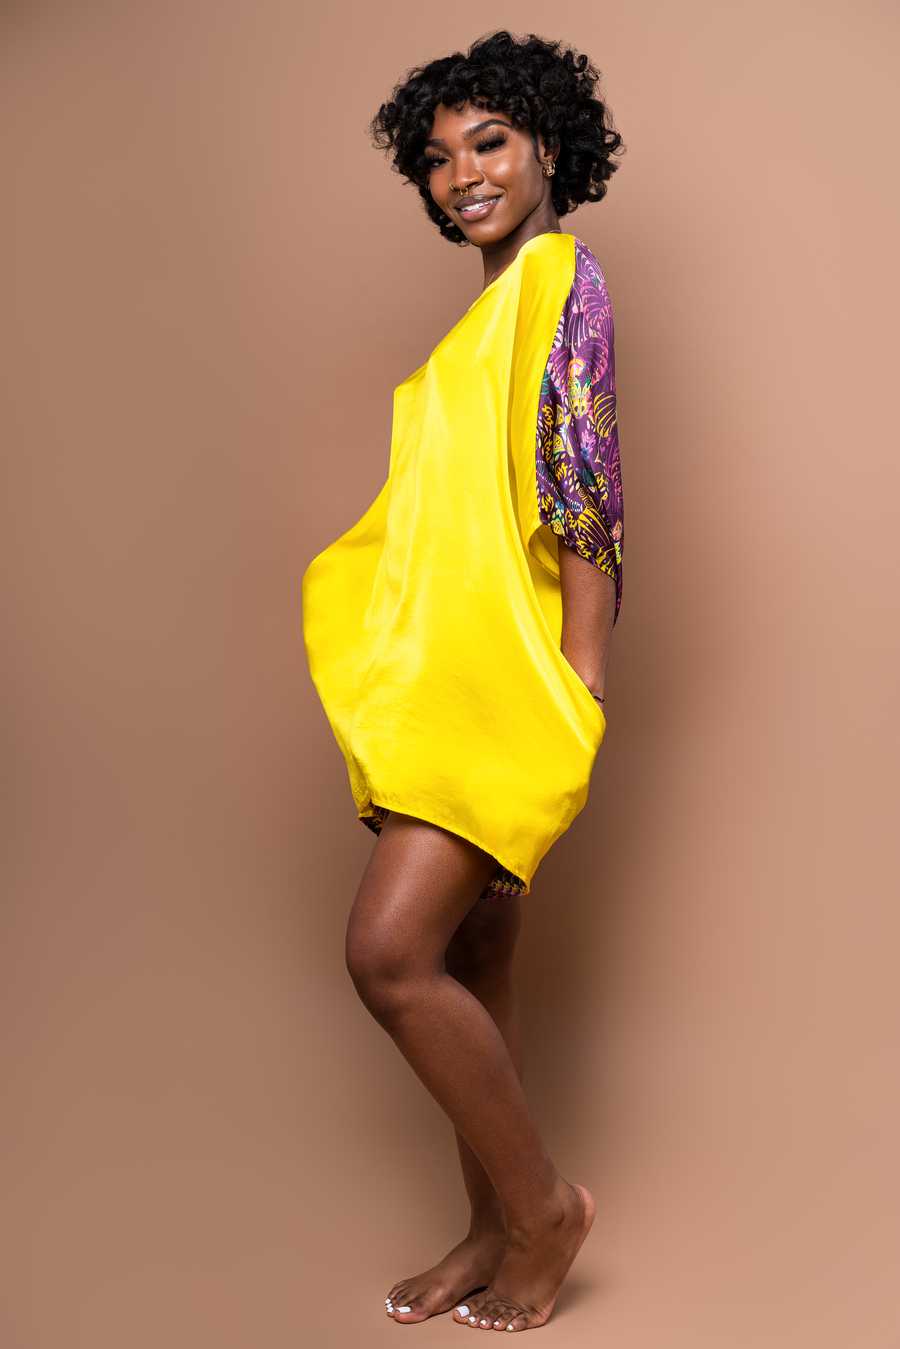 Tunde Tunic Mini Dress in Silk - Sophisticated Soul of Gold